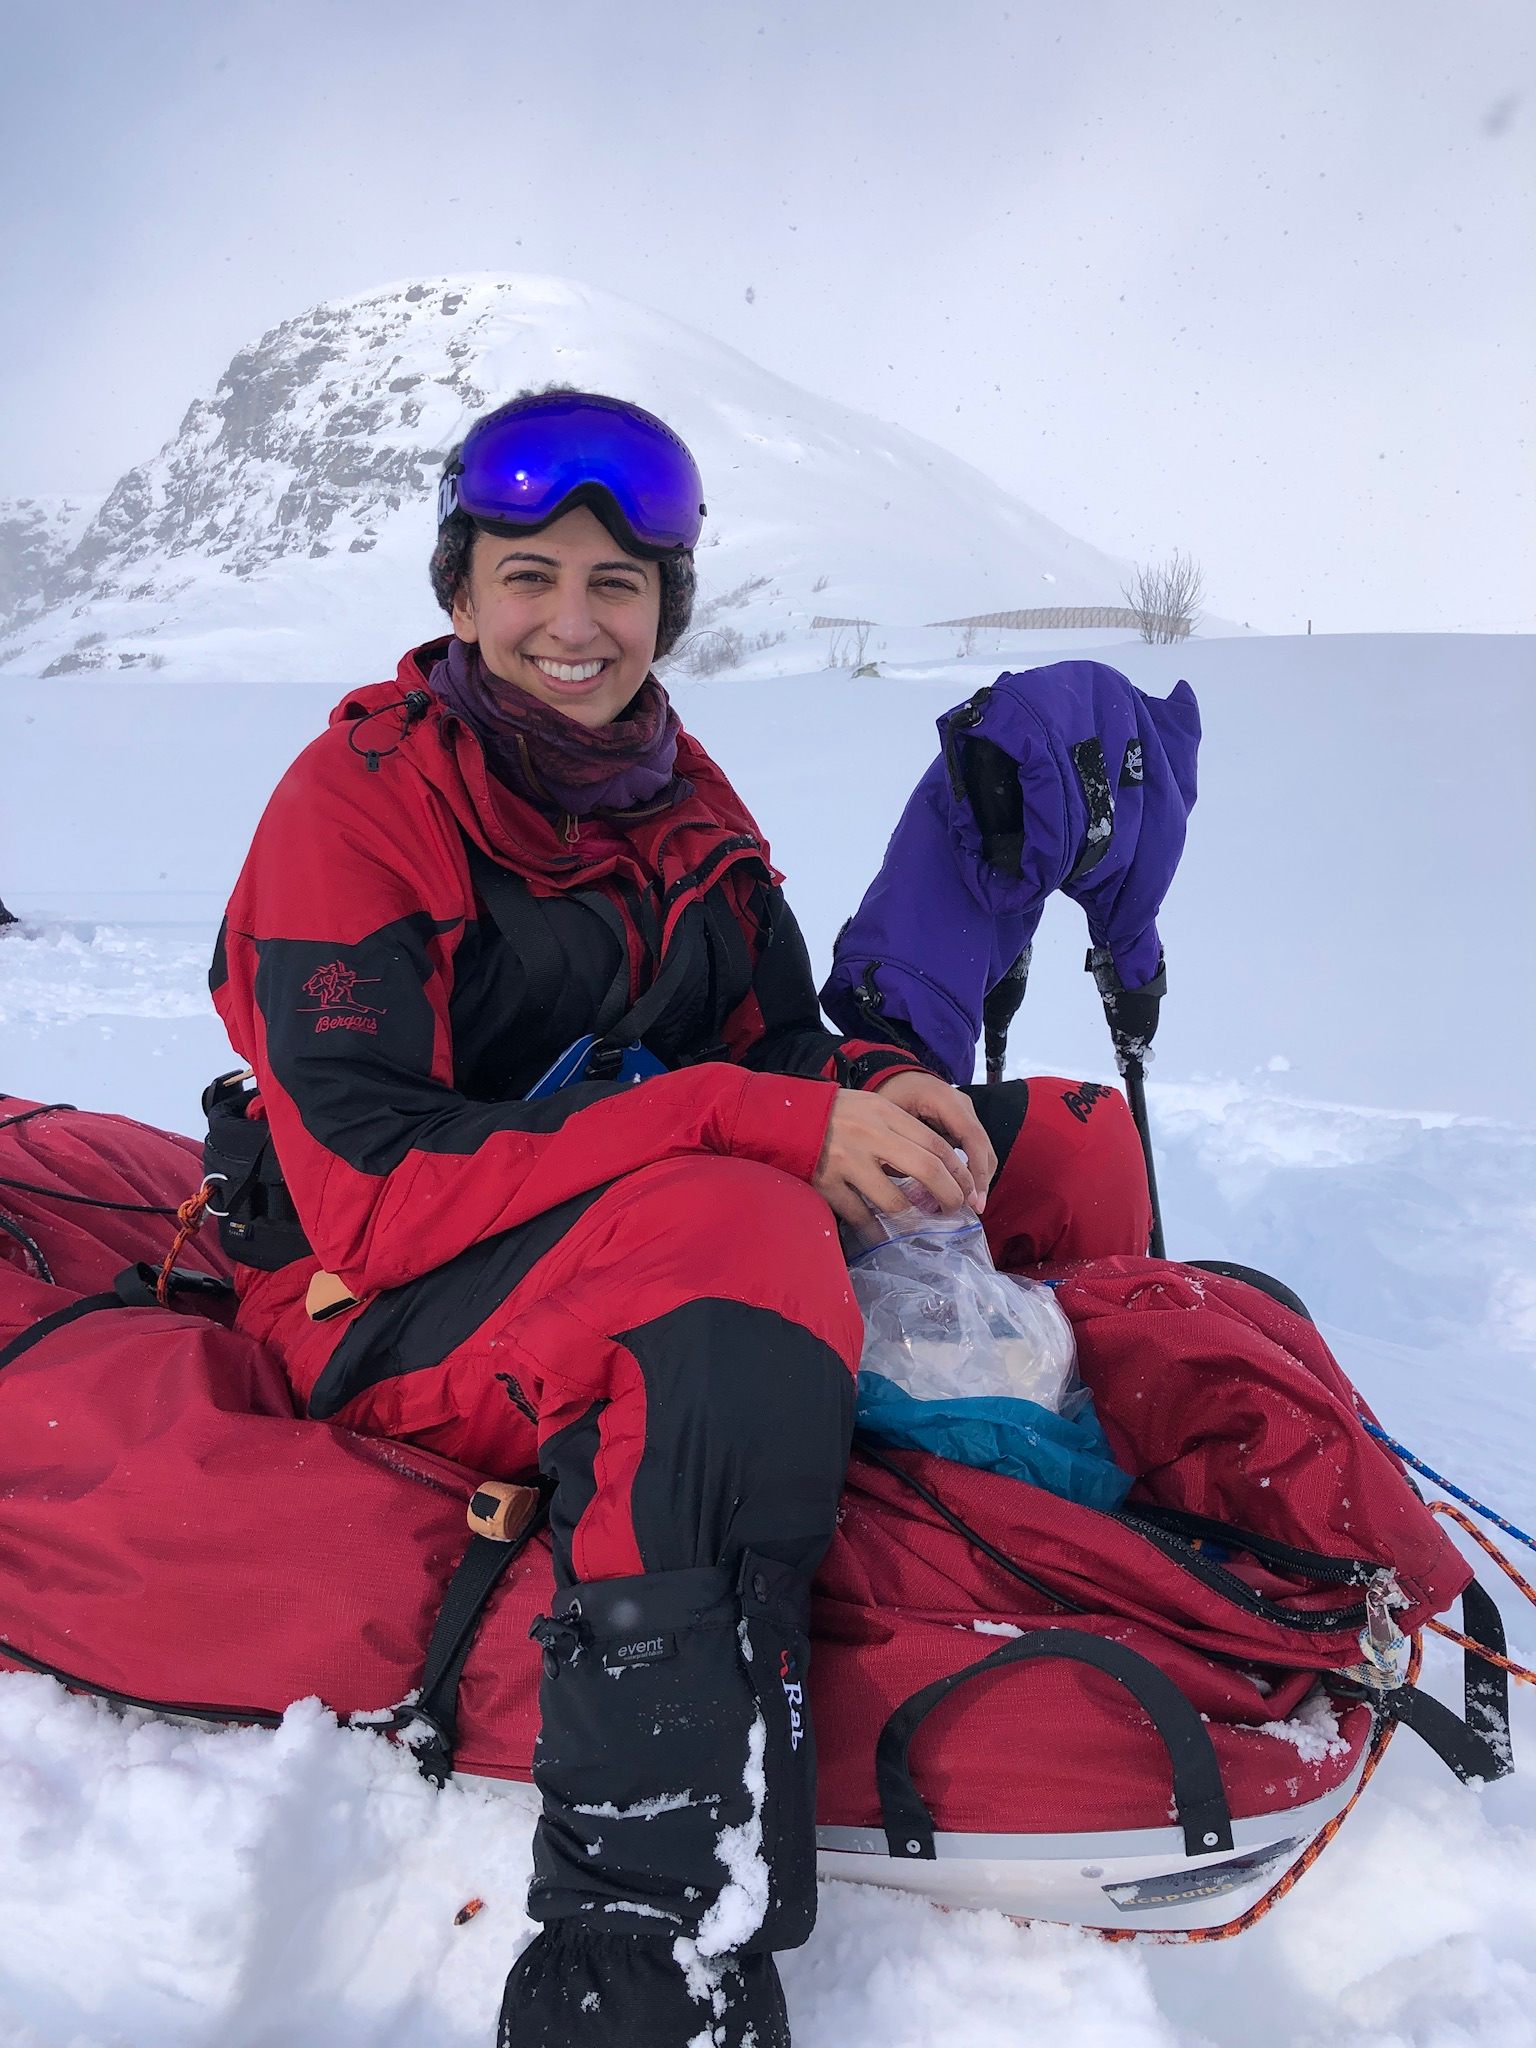 Harpreet Chandi, the daughter and granddaughter of immigrants from India, is widely believed to be the first woman of color to make a solo South Pole trek, completing her journey in January 2022.